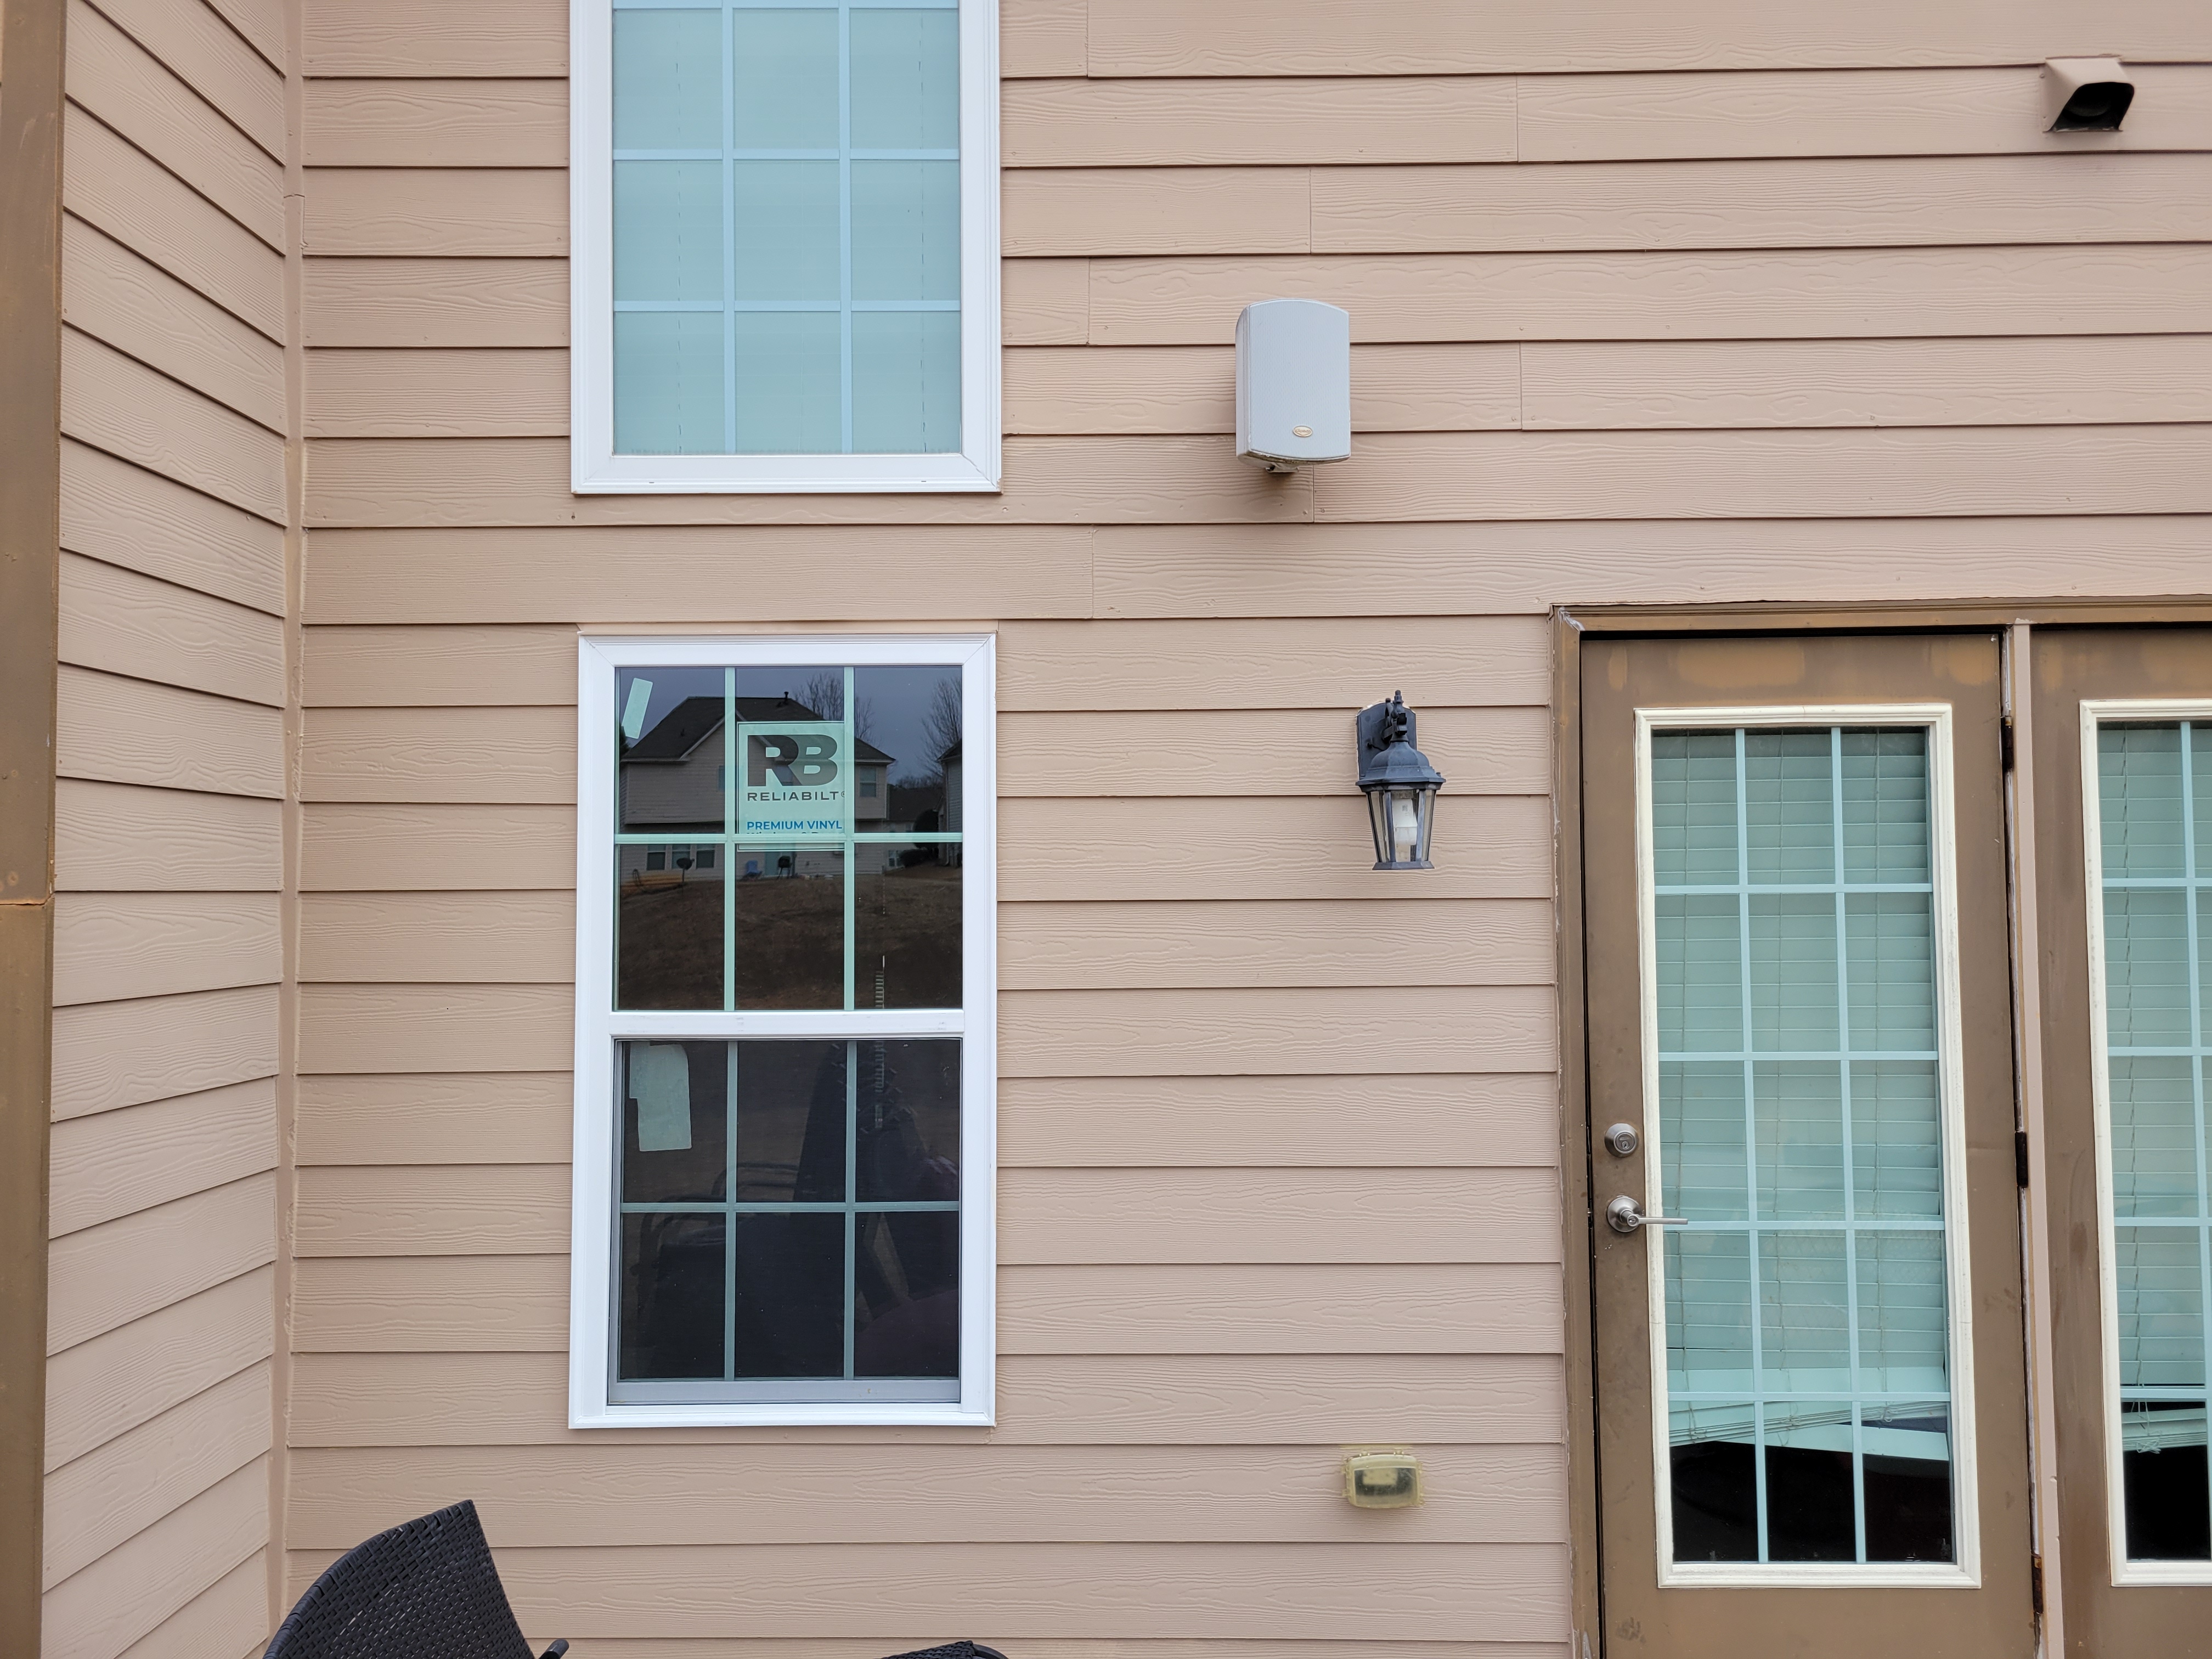 Replacement window install / Siding